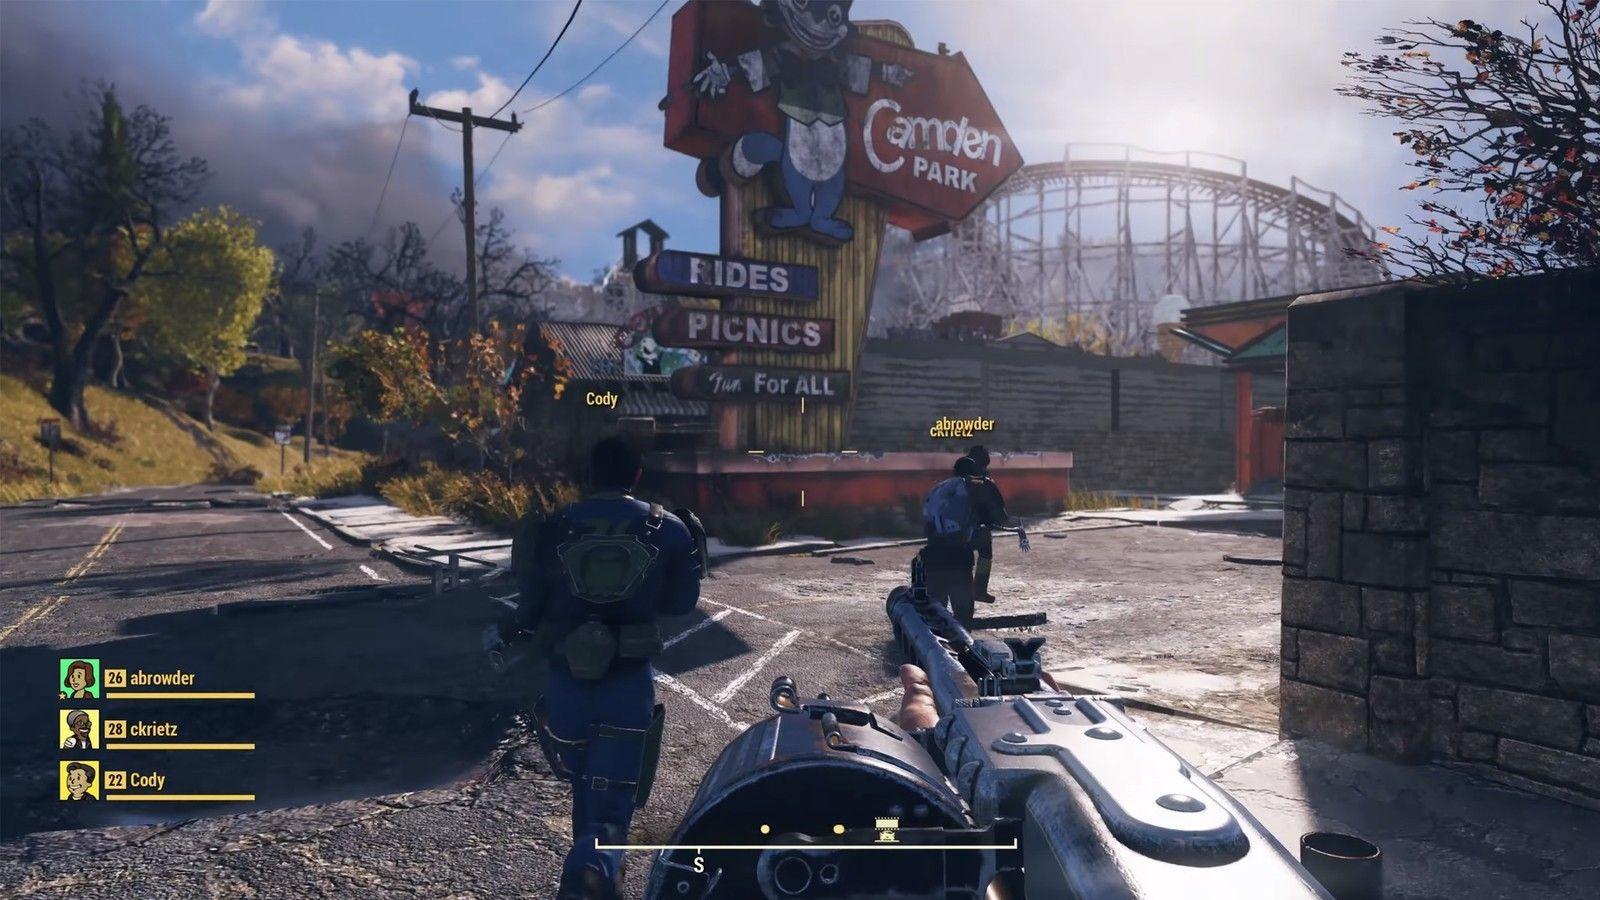 Fallout 76 weapons, crafting, and mods explained